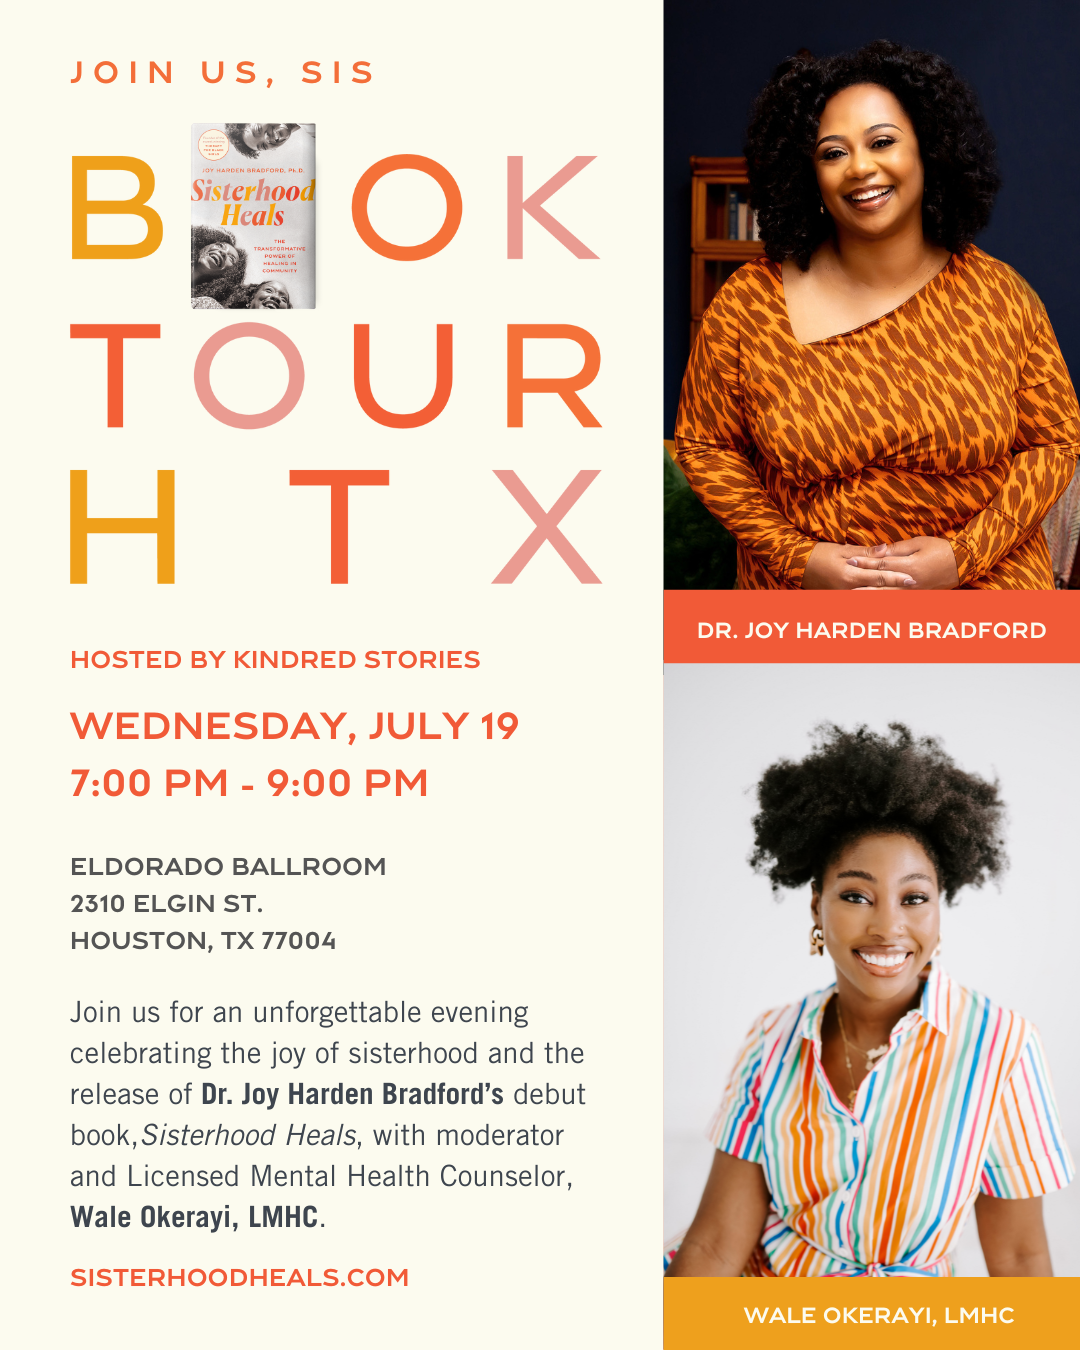 IN PERSON AUTHOR TALK: Sisterhood Heals with Dr. Joy Harden Bradford (Founder of Therapy for Black Girls)-July 19 at 7PM CST (PURCHASE TICKETS ON EVENBRITE)